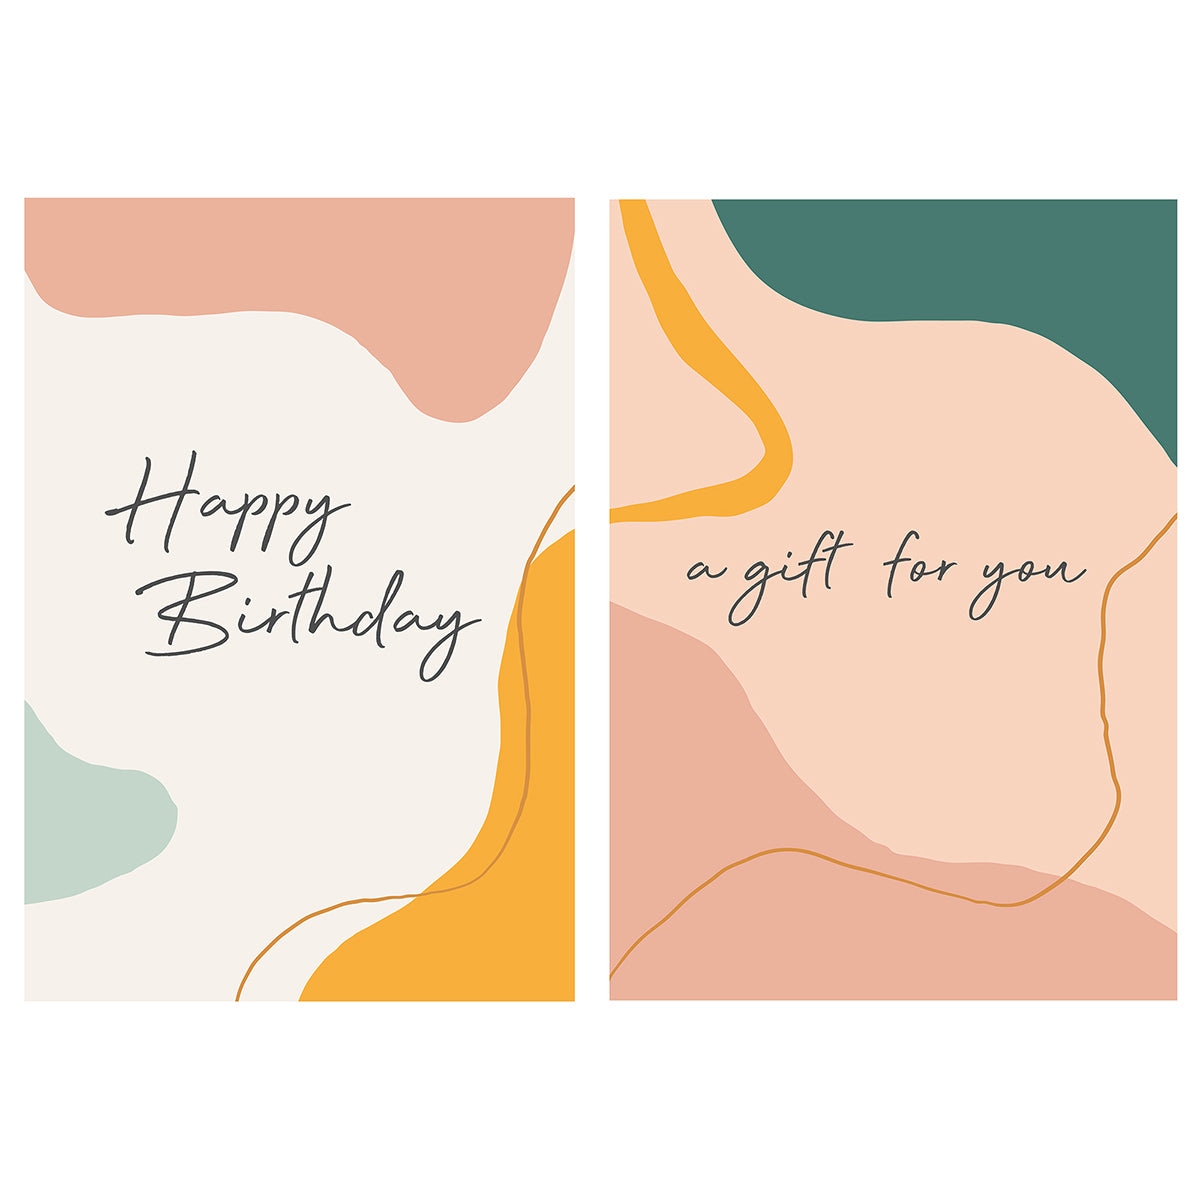 Two greeting cards side by side with abstract pastel designs; the left card says "Happy Birthday" and the right card says "a gift for you" in cursive font.